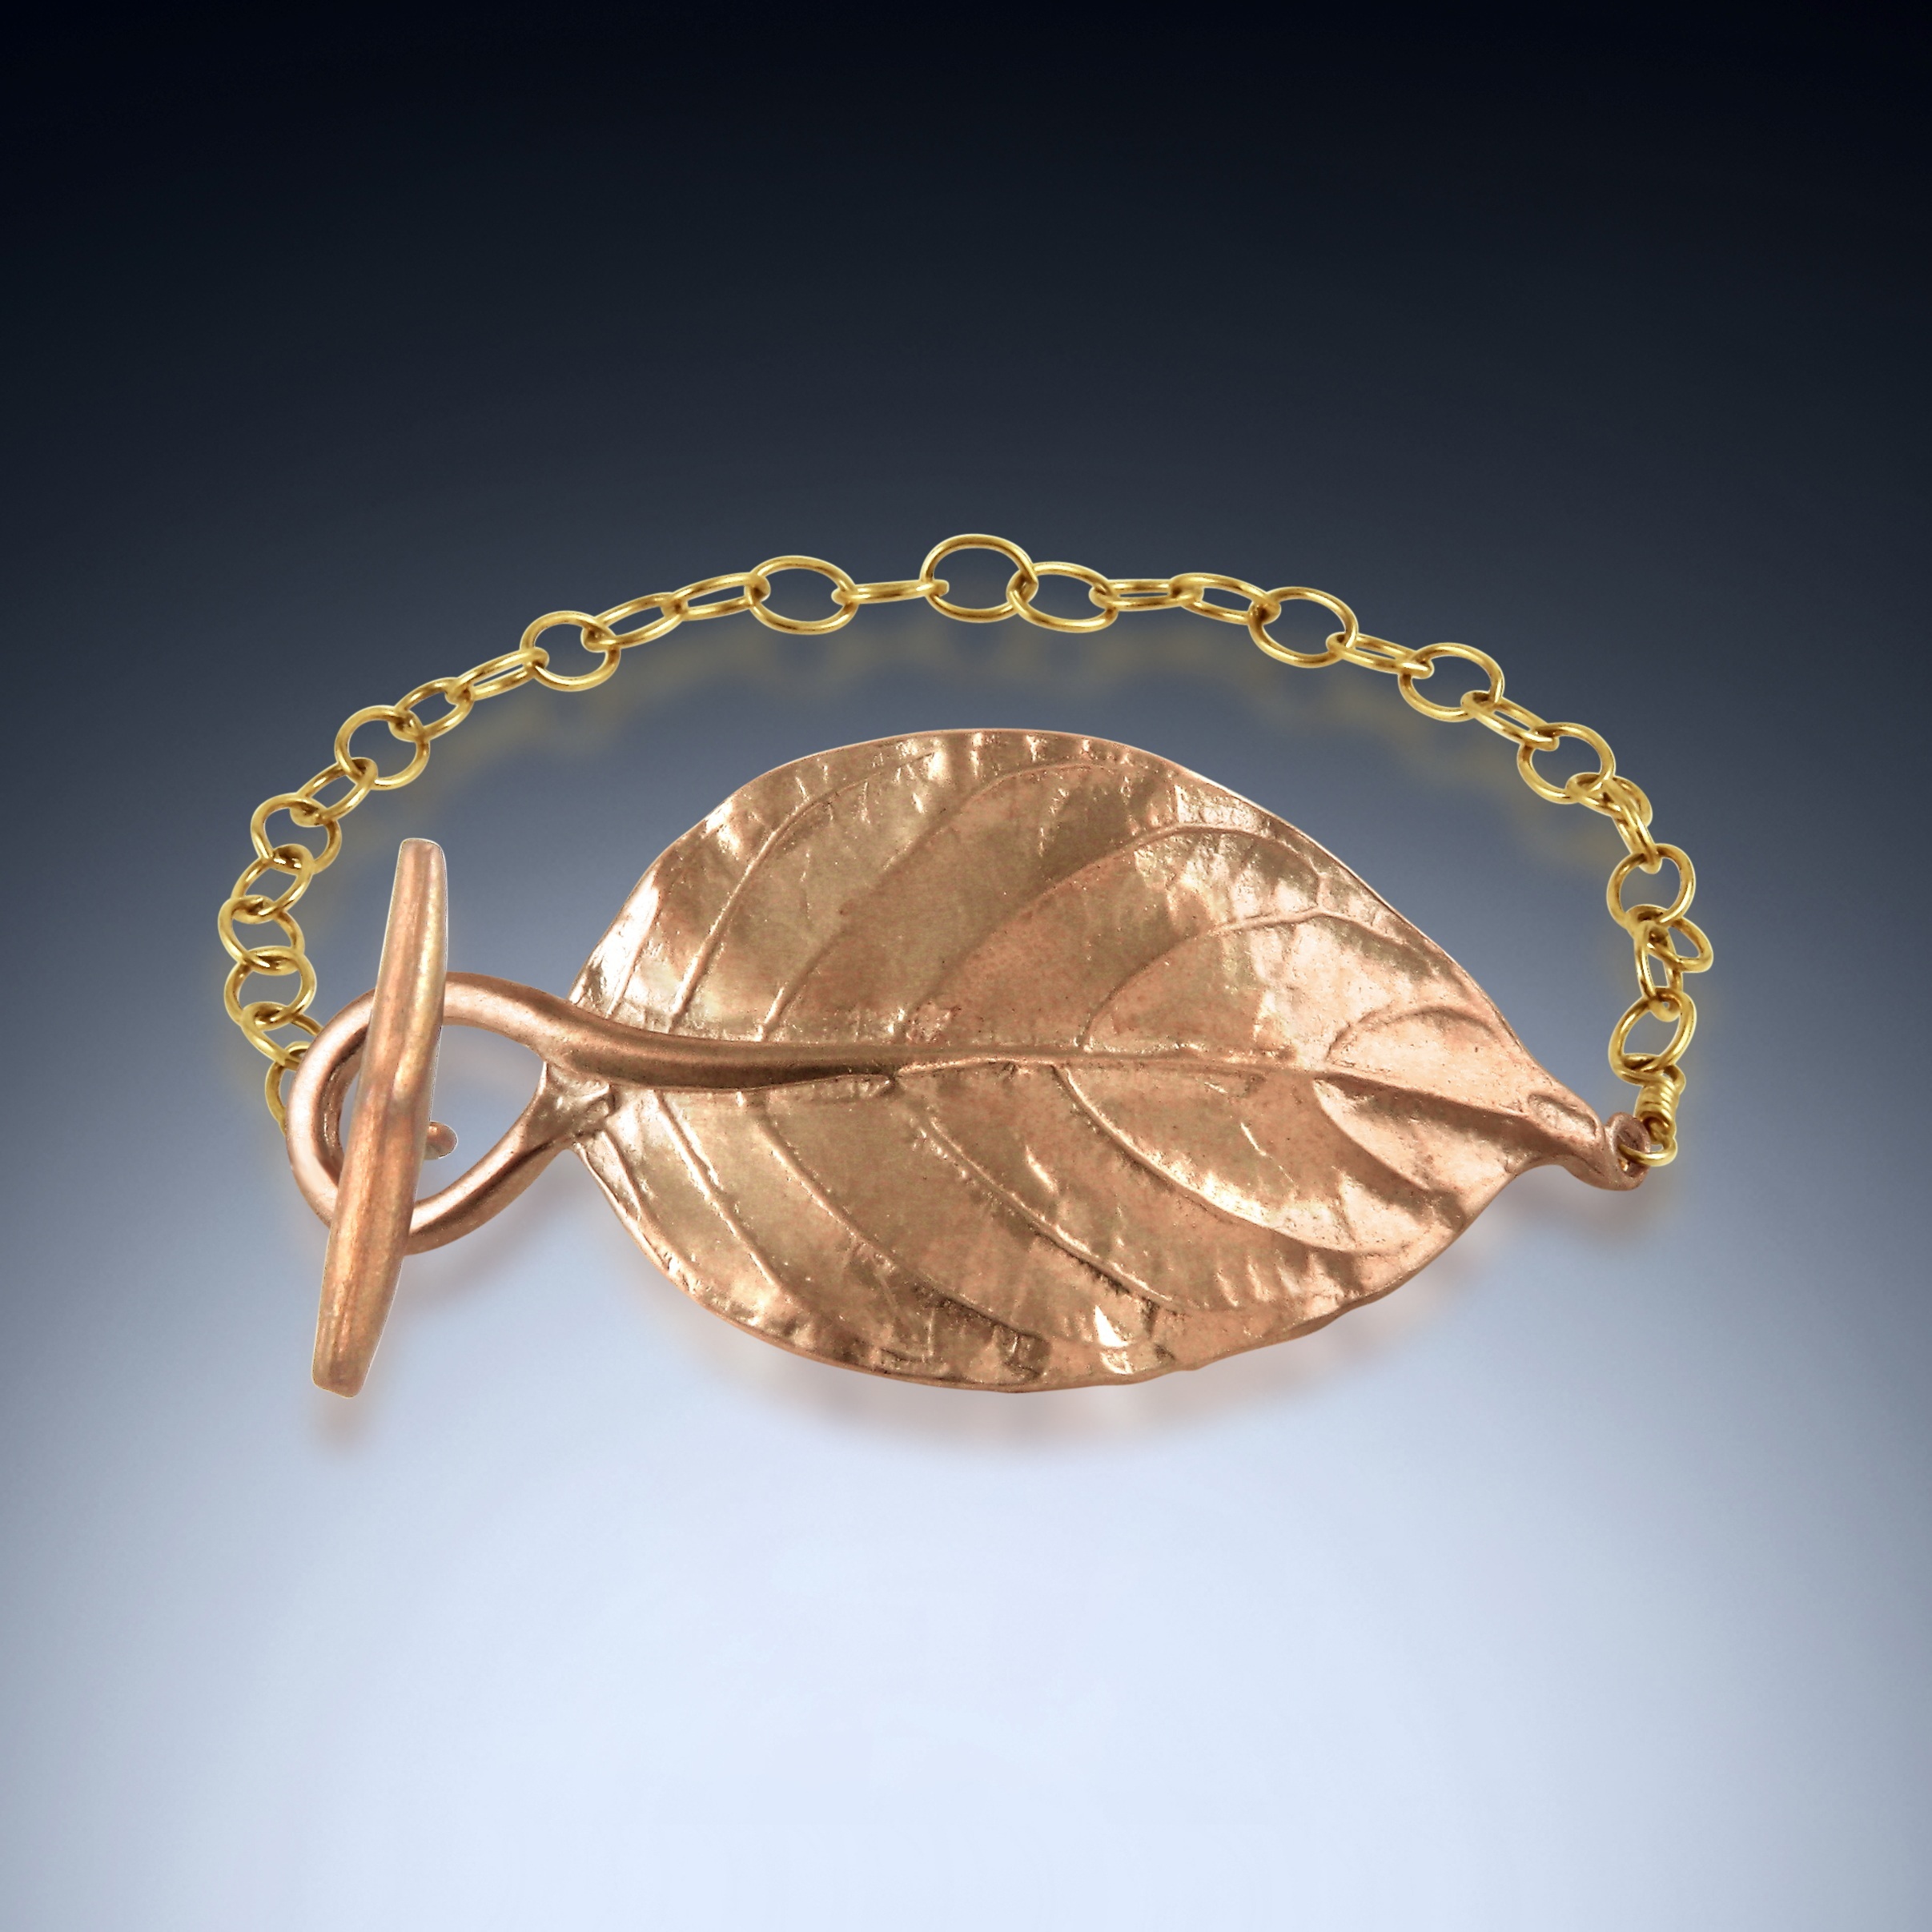 Real Leaf Bracelets in Sterling Silver and Copper